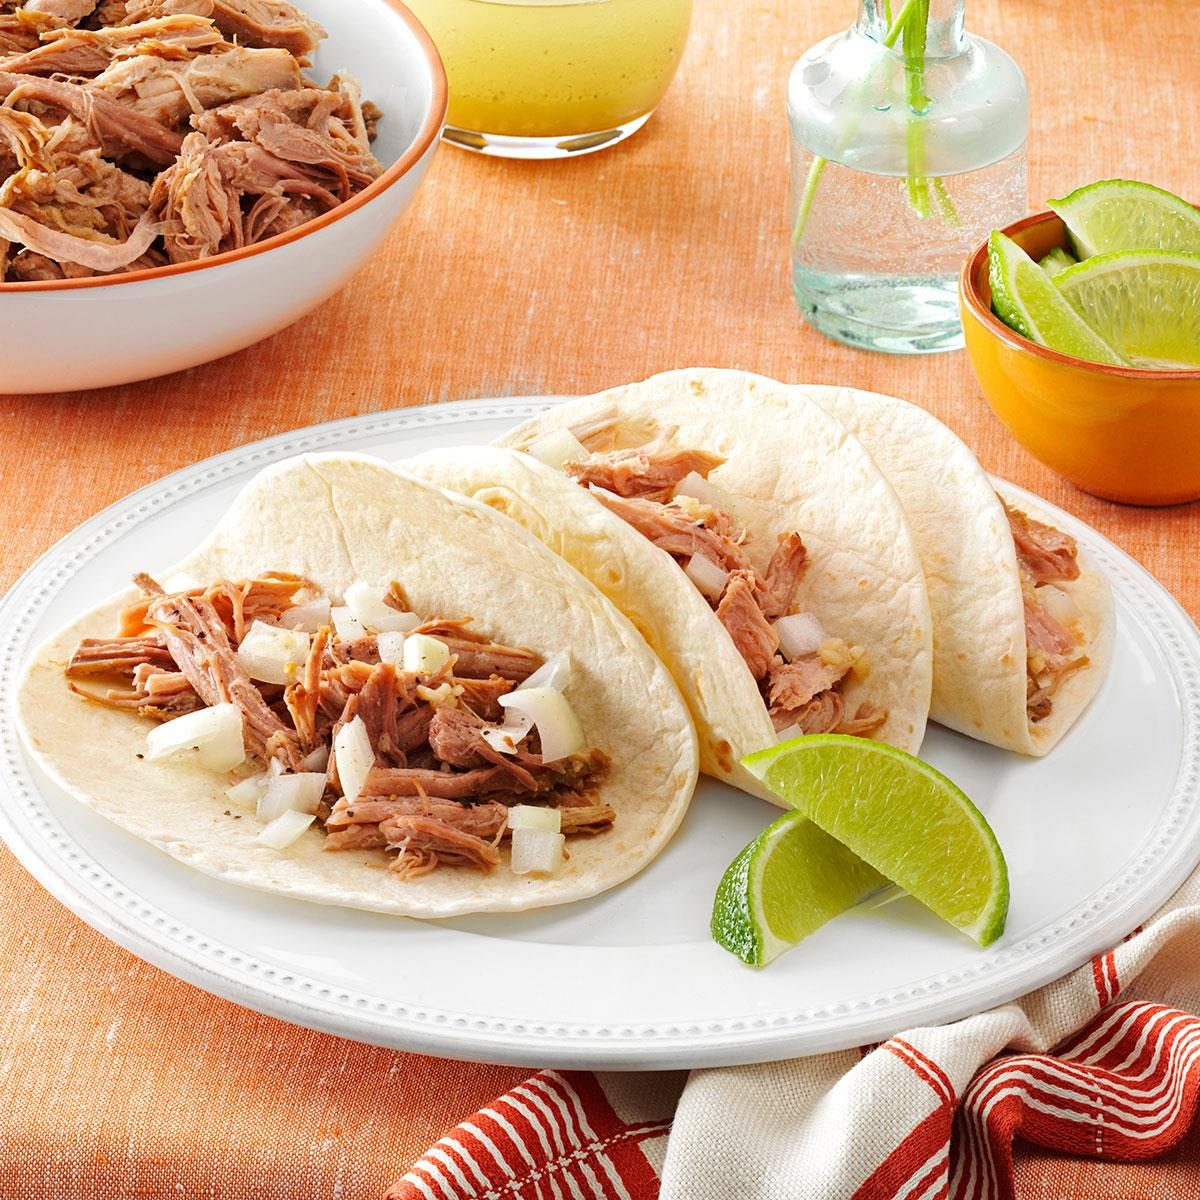 Slow Cooked Pulled Pork With Mojito Sauce Exps163635 Thraa2874593b01 30 5bc Rms 2